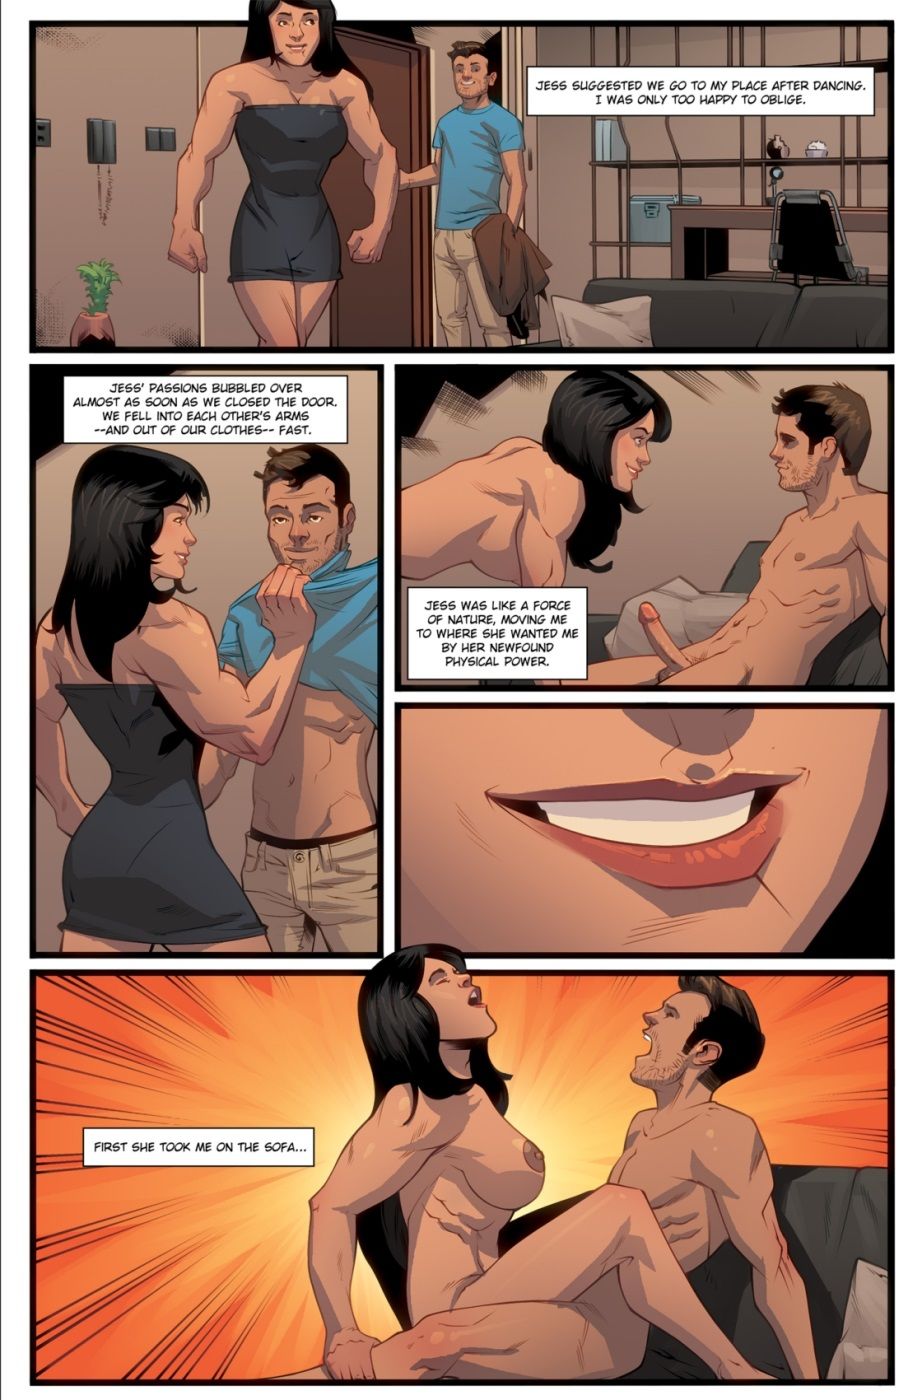 Better and Better 1 - MuscleFan page 9